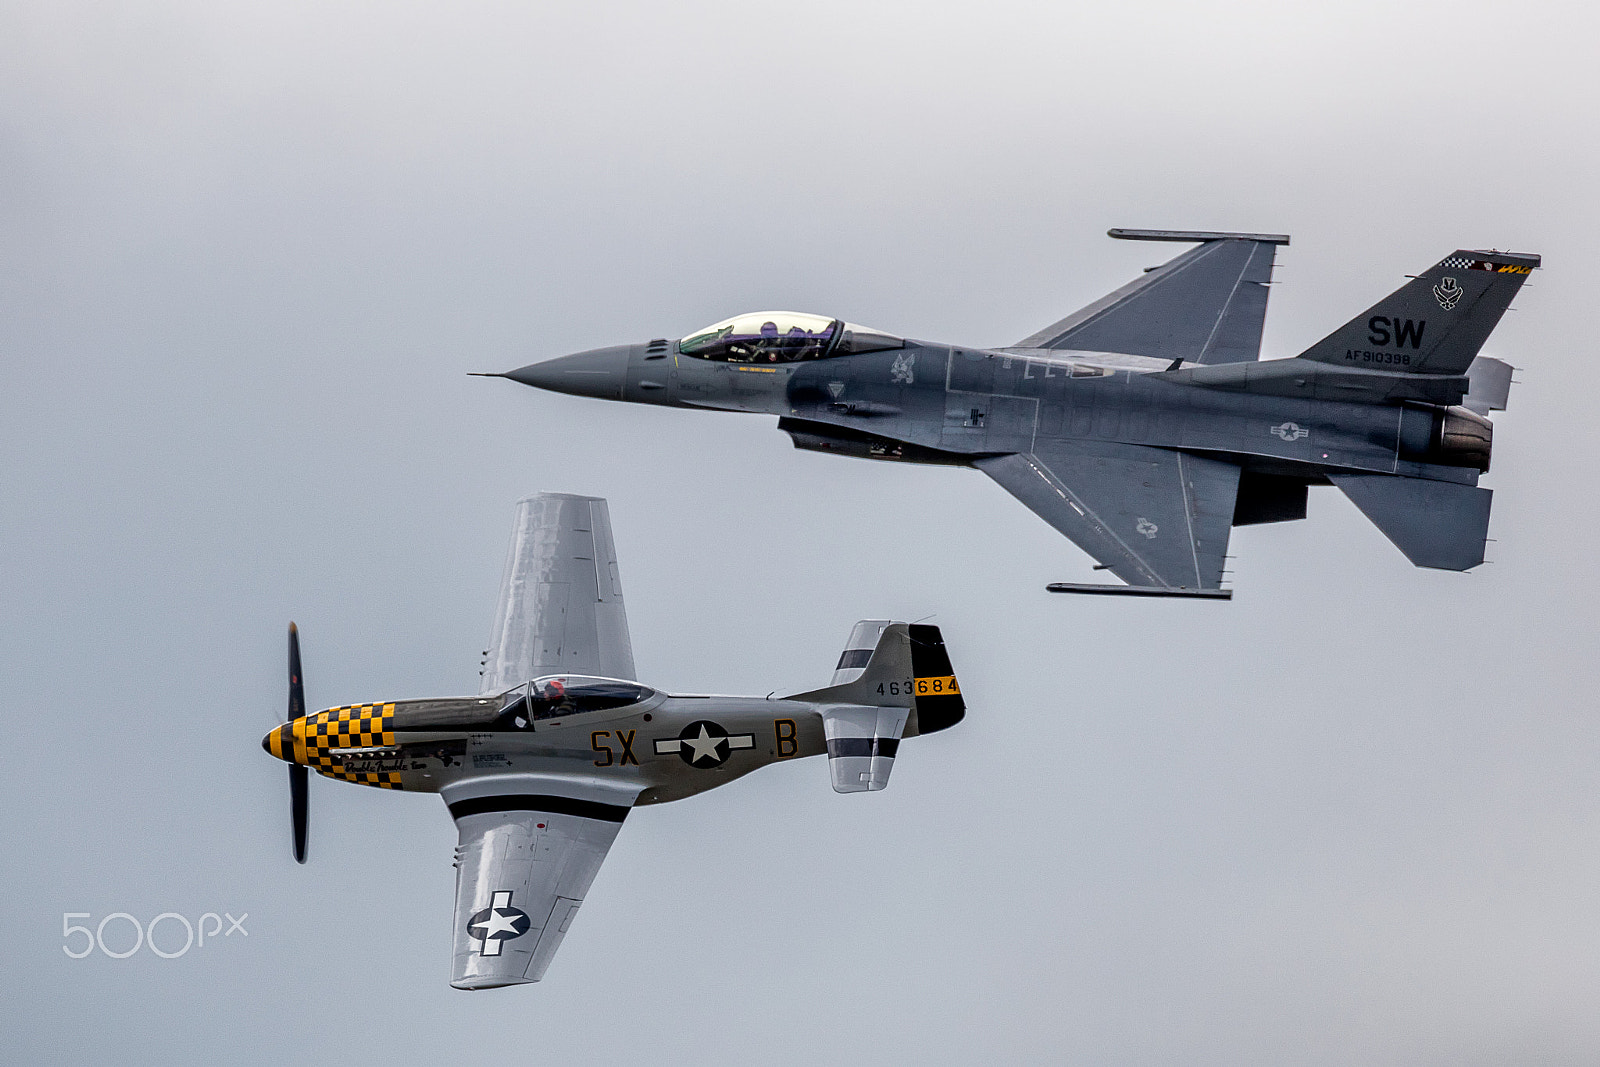 Canon EOS 5DS sample photo. P-51 mustang and f-16 fighting falcon in flight 2 photography